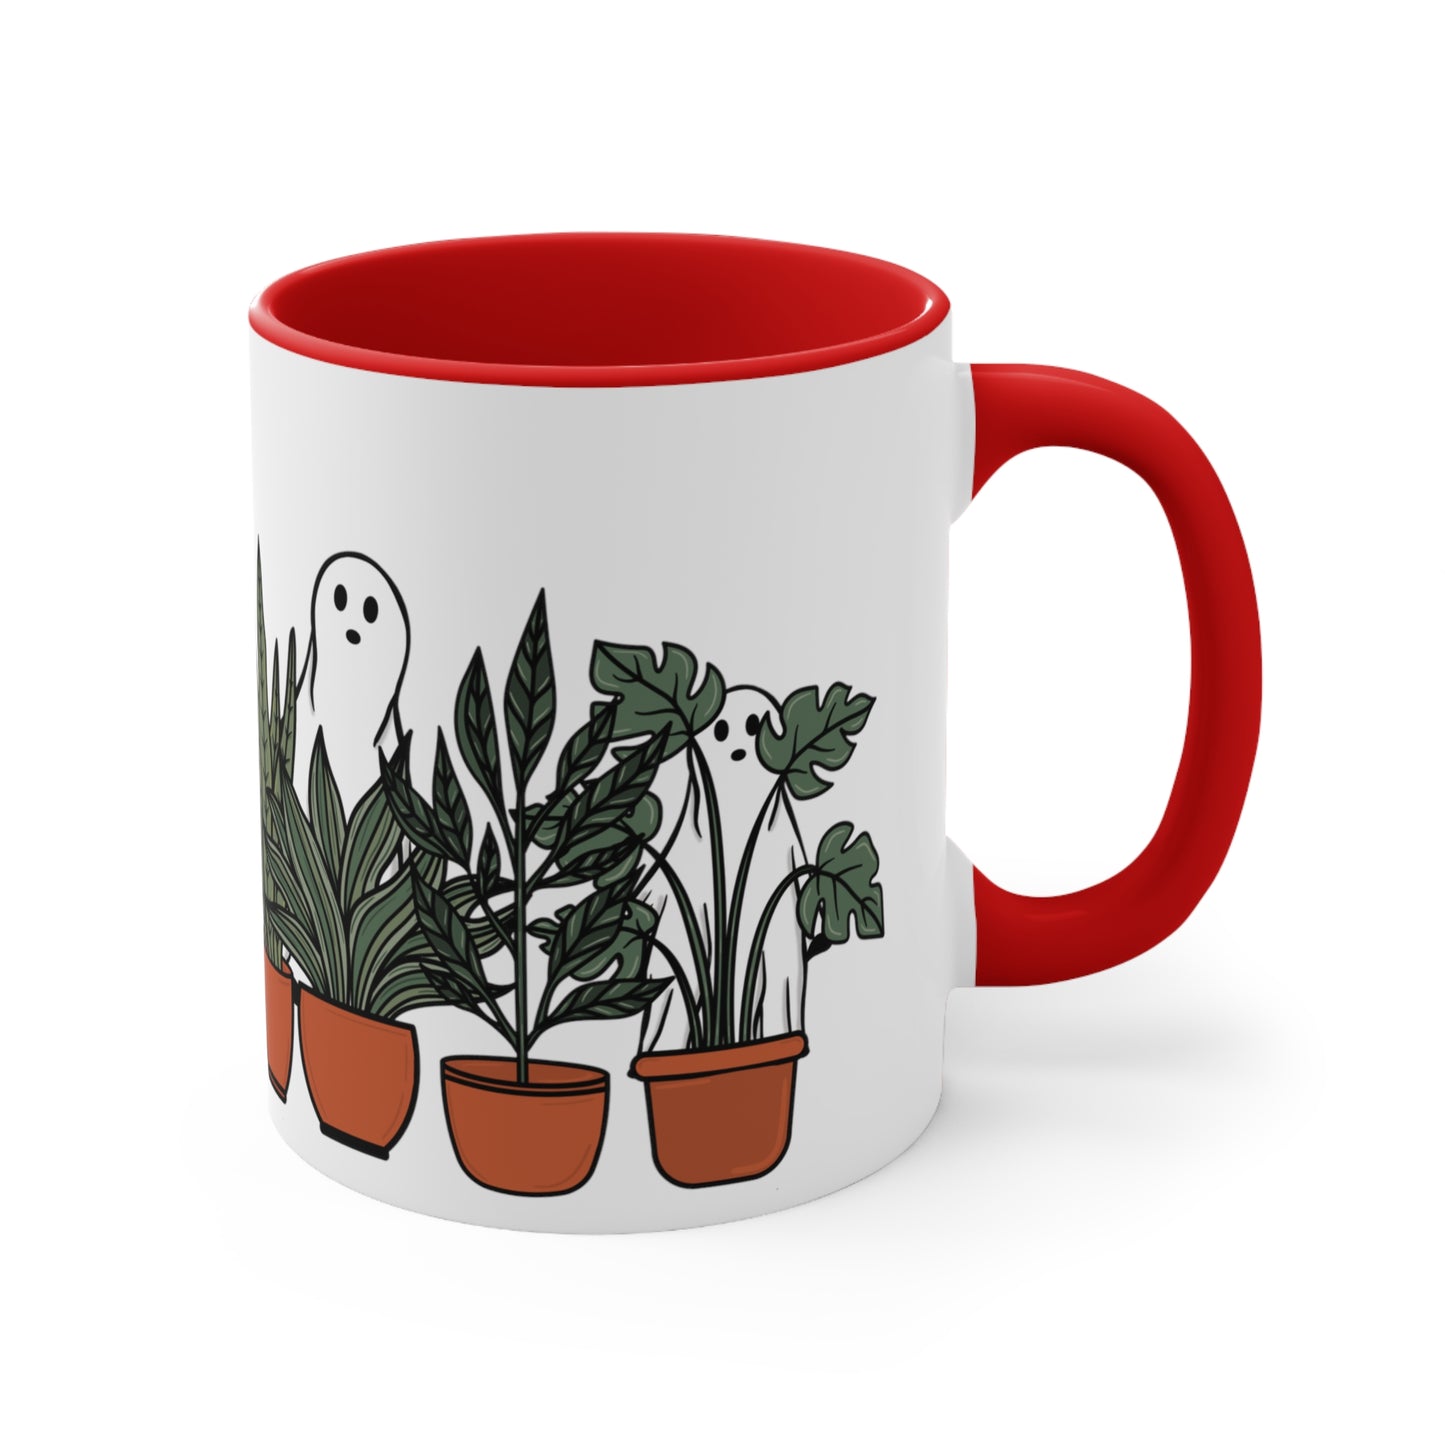 Potted plants and ghosts ceramic Coffee Mug, 11oz for him or her. Cute Halloween coffee mug with house plants for plant lady or plant daddy.